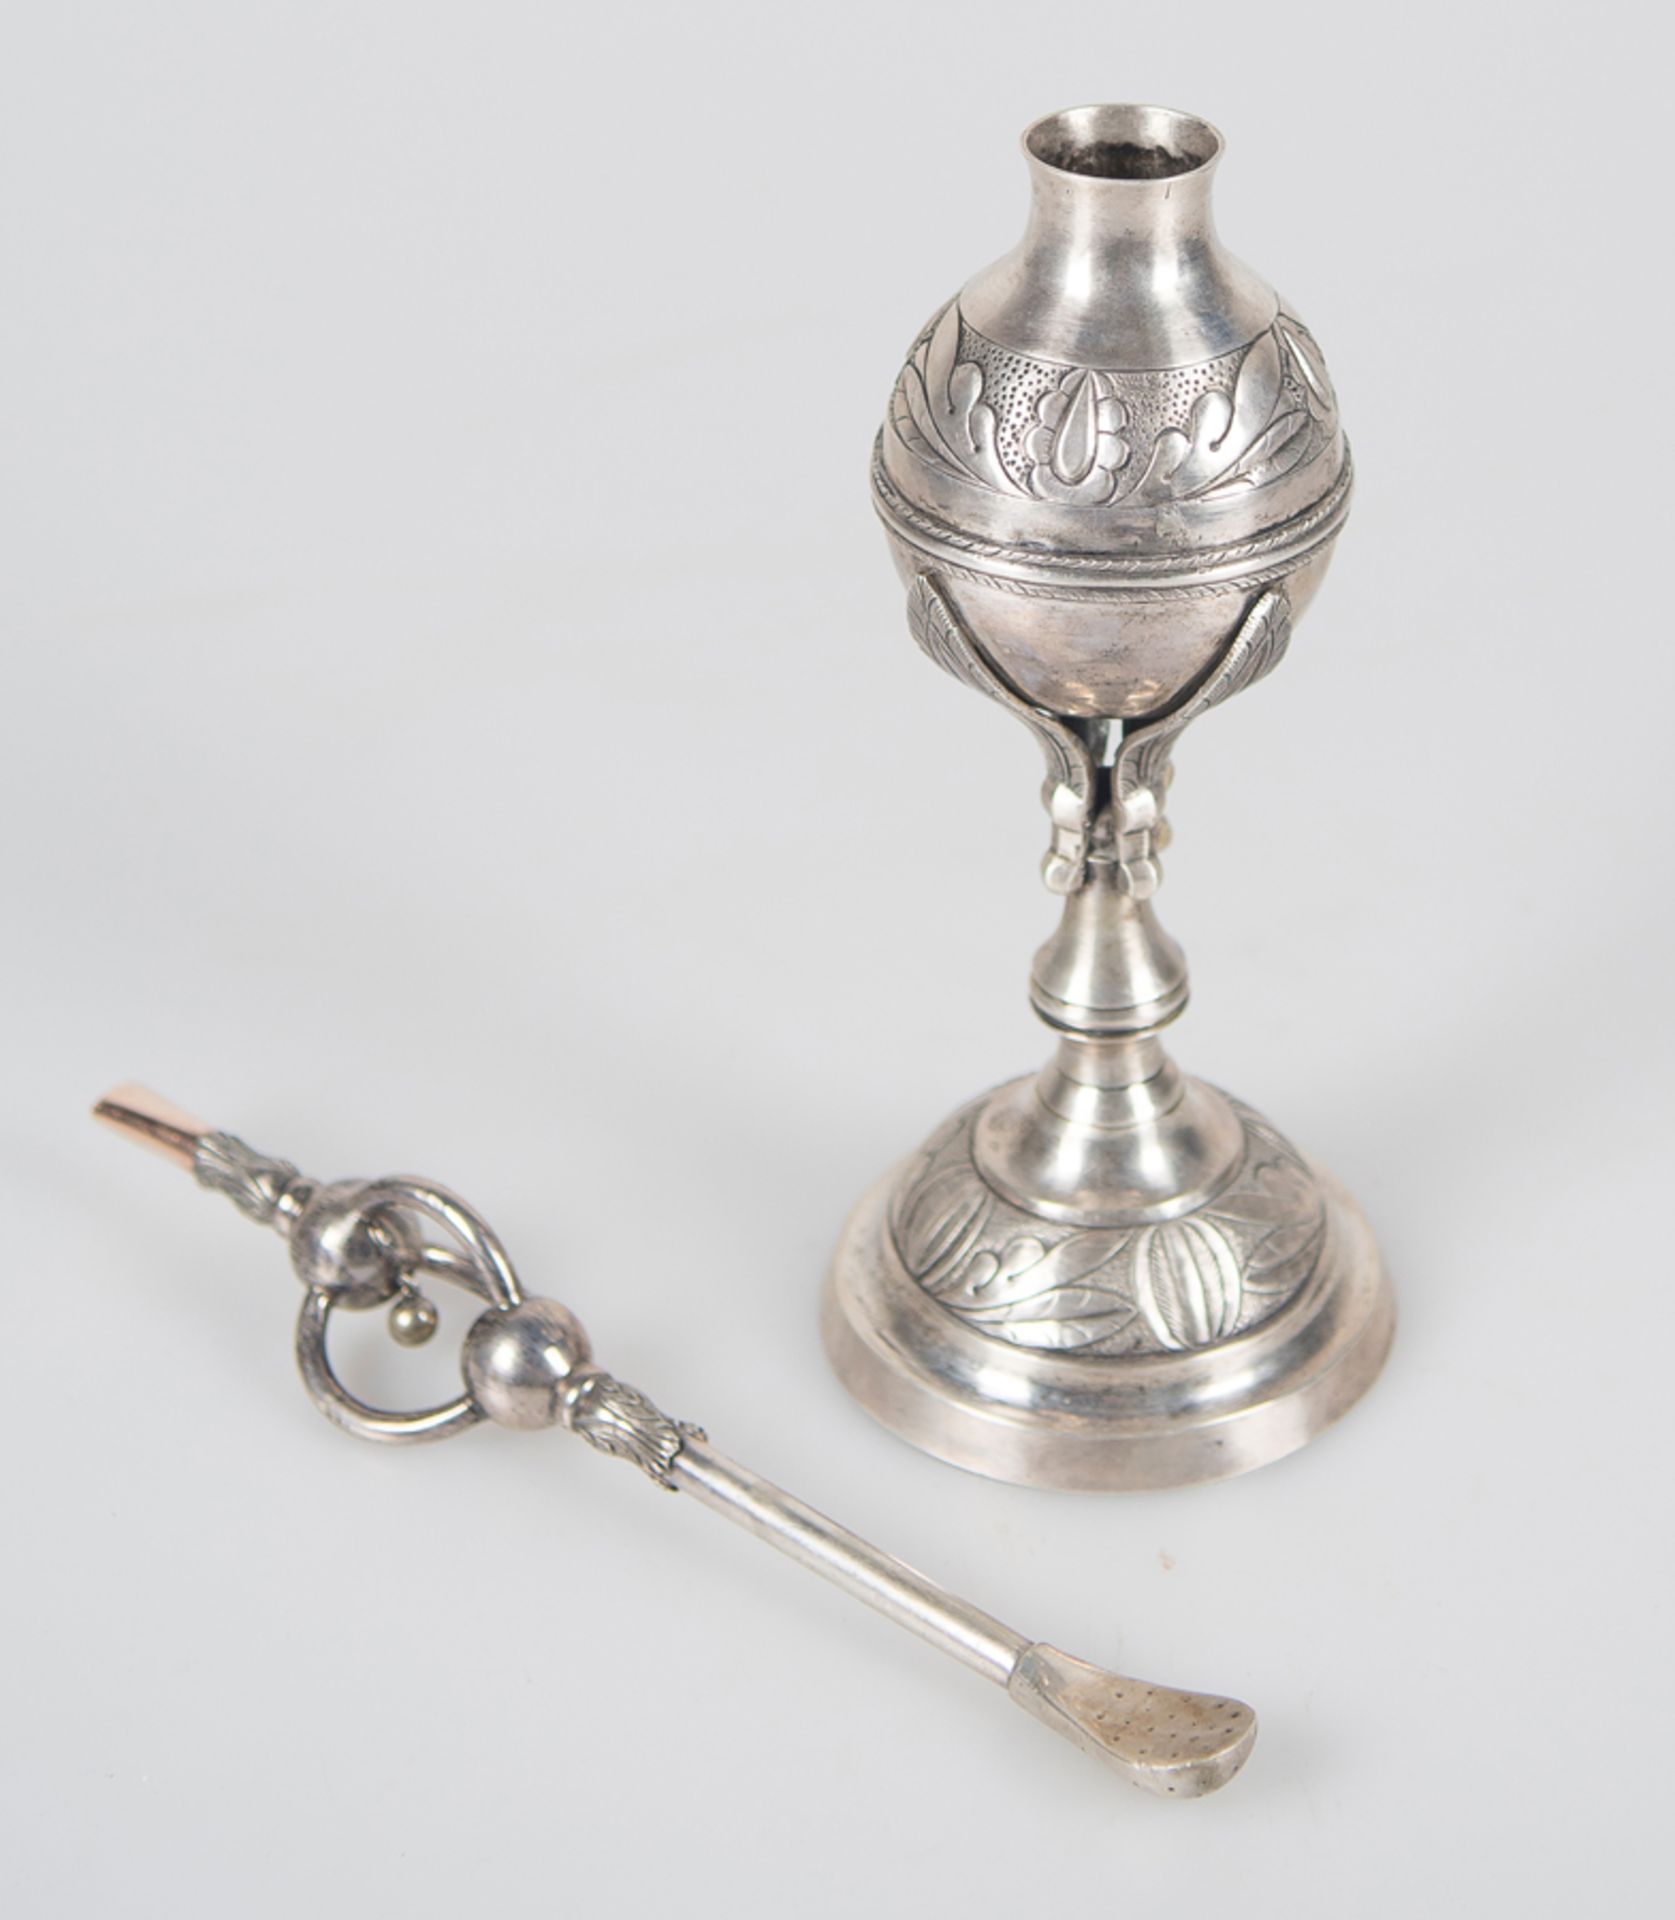 Mate in silver and gilded silver with its original bulb. Viceregal work. Possibly Chile or Cuyo regi - Image 2 of 6